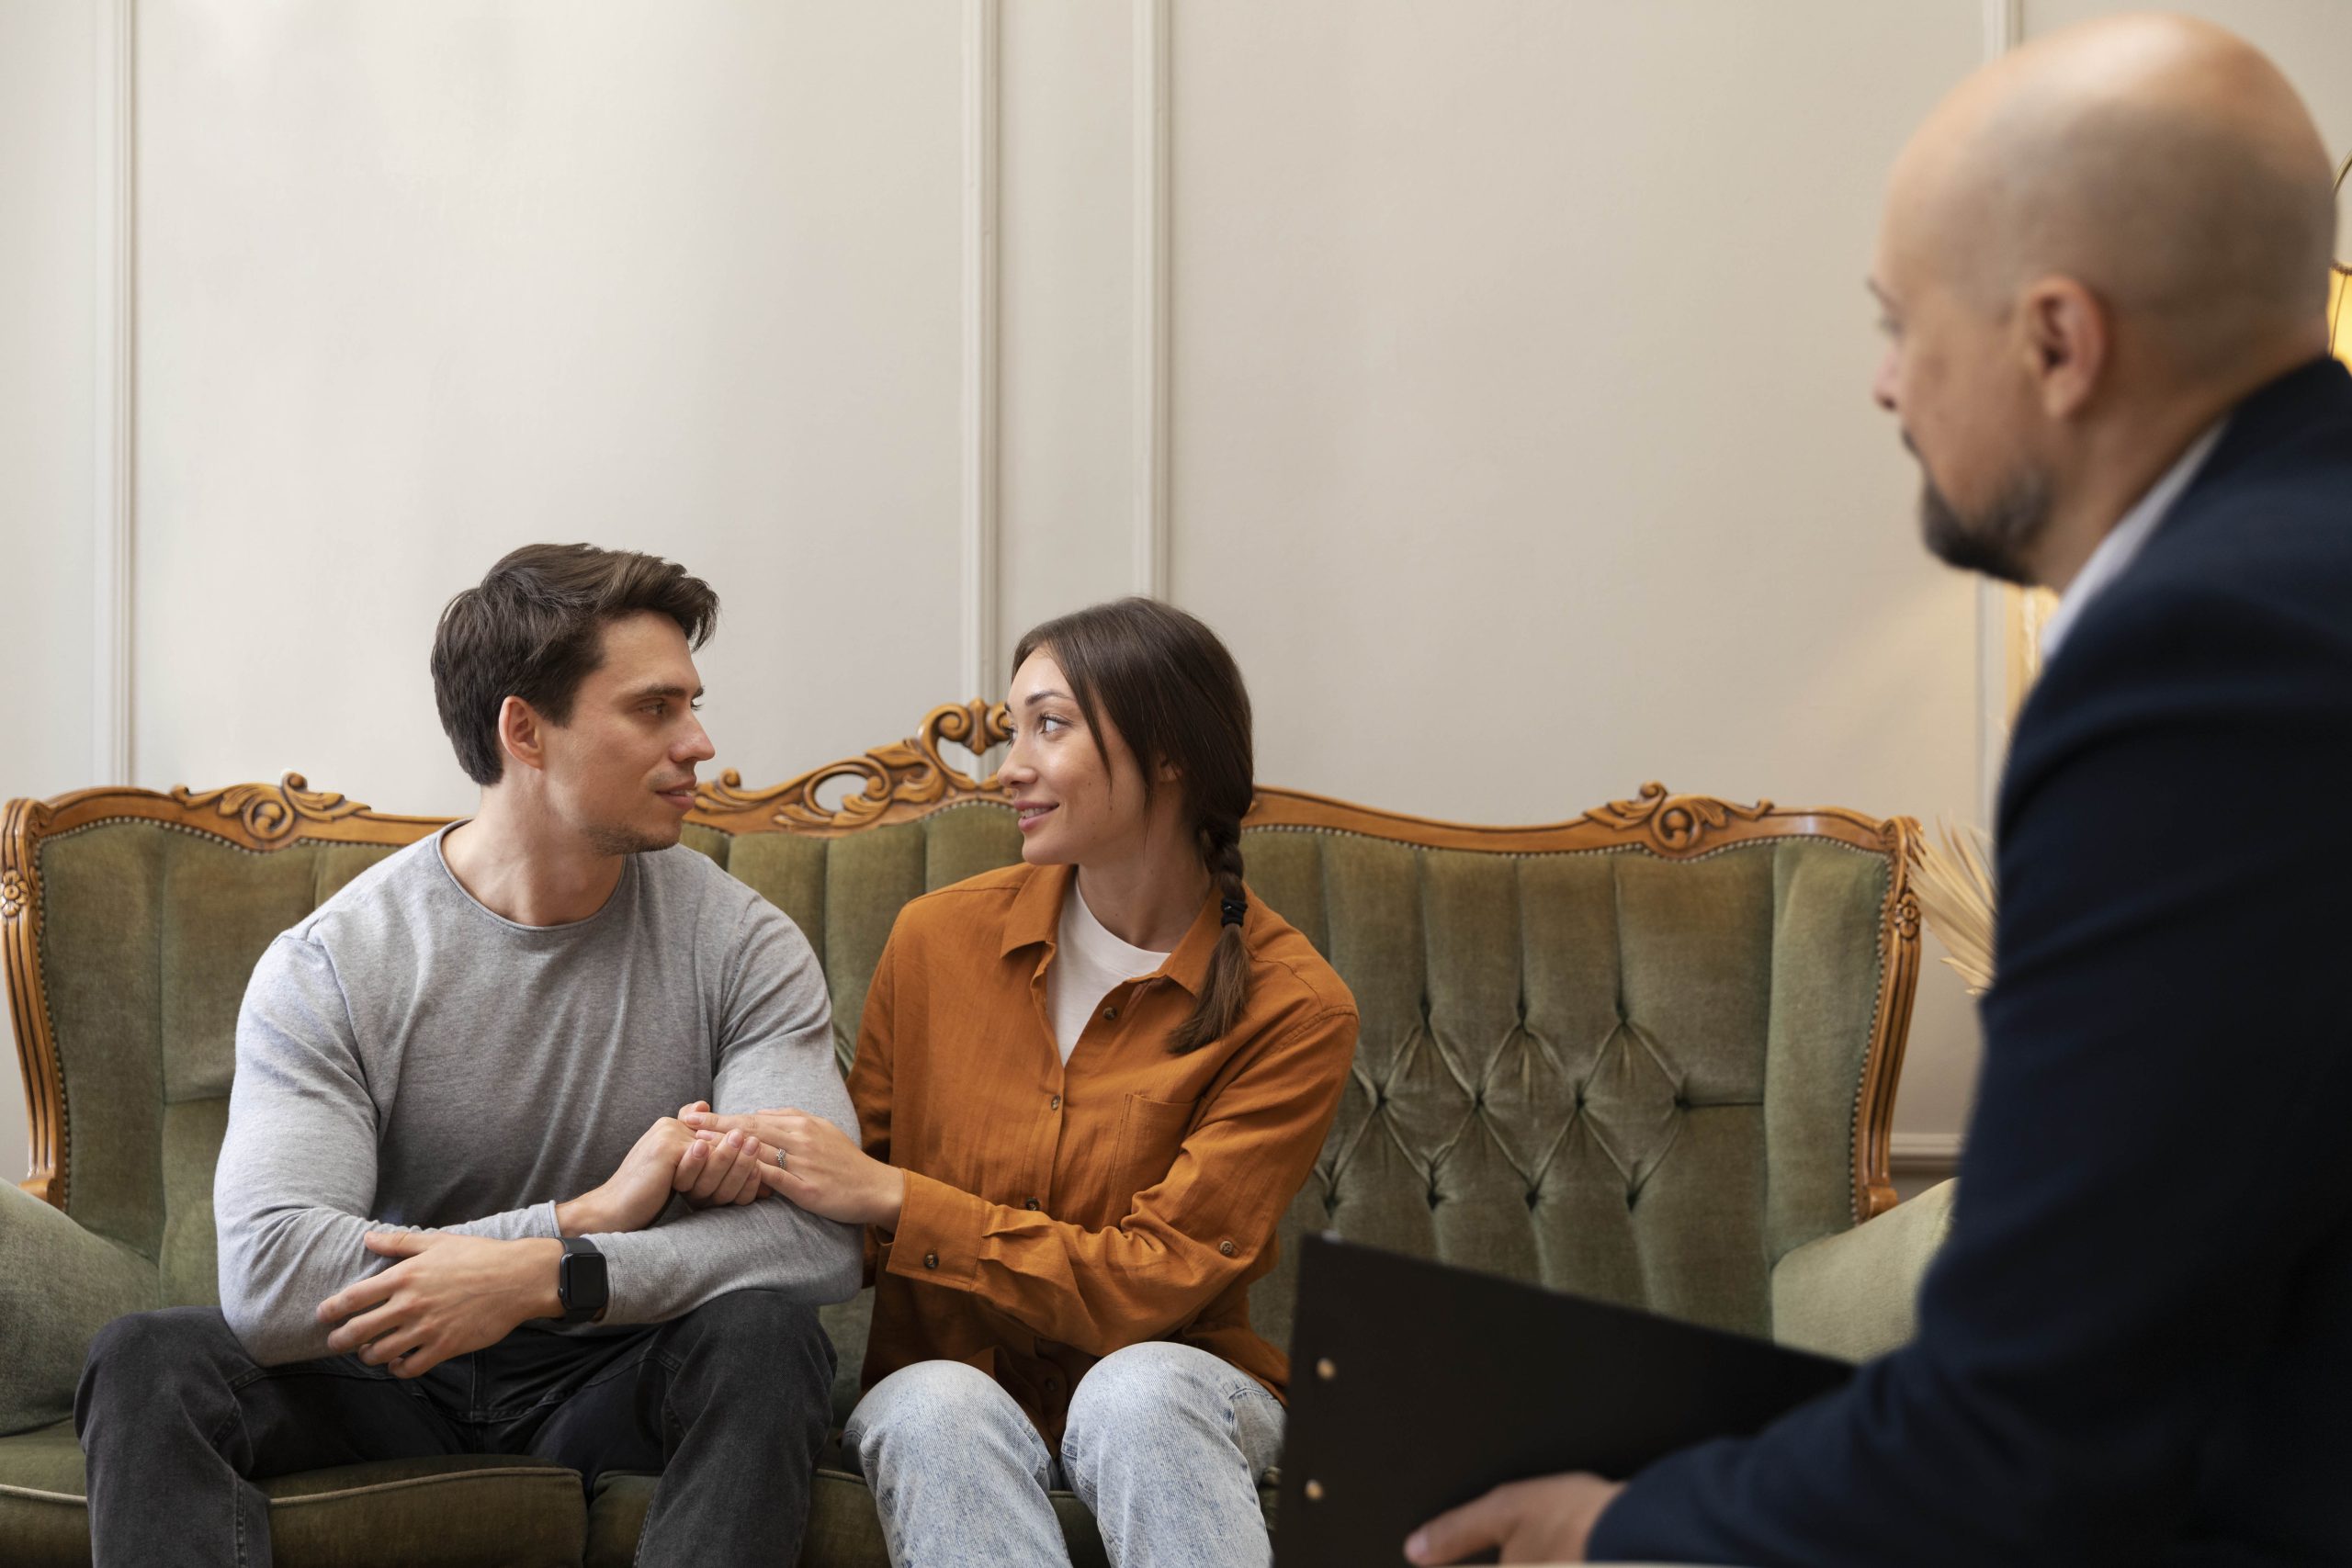 Improving Relationships Through Couples Therapy